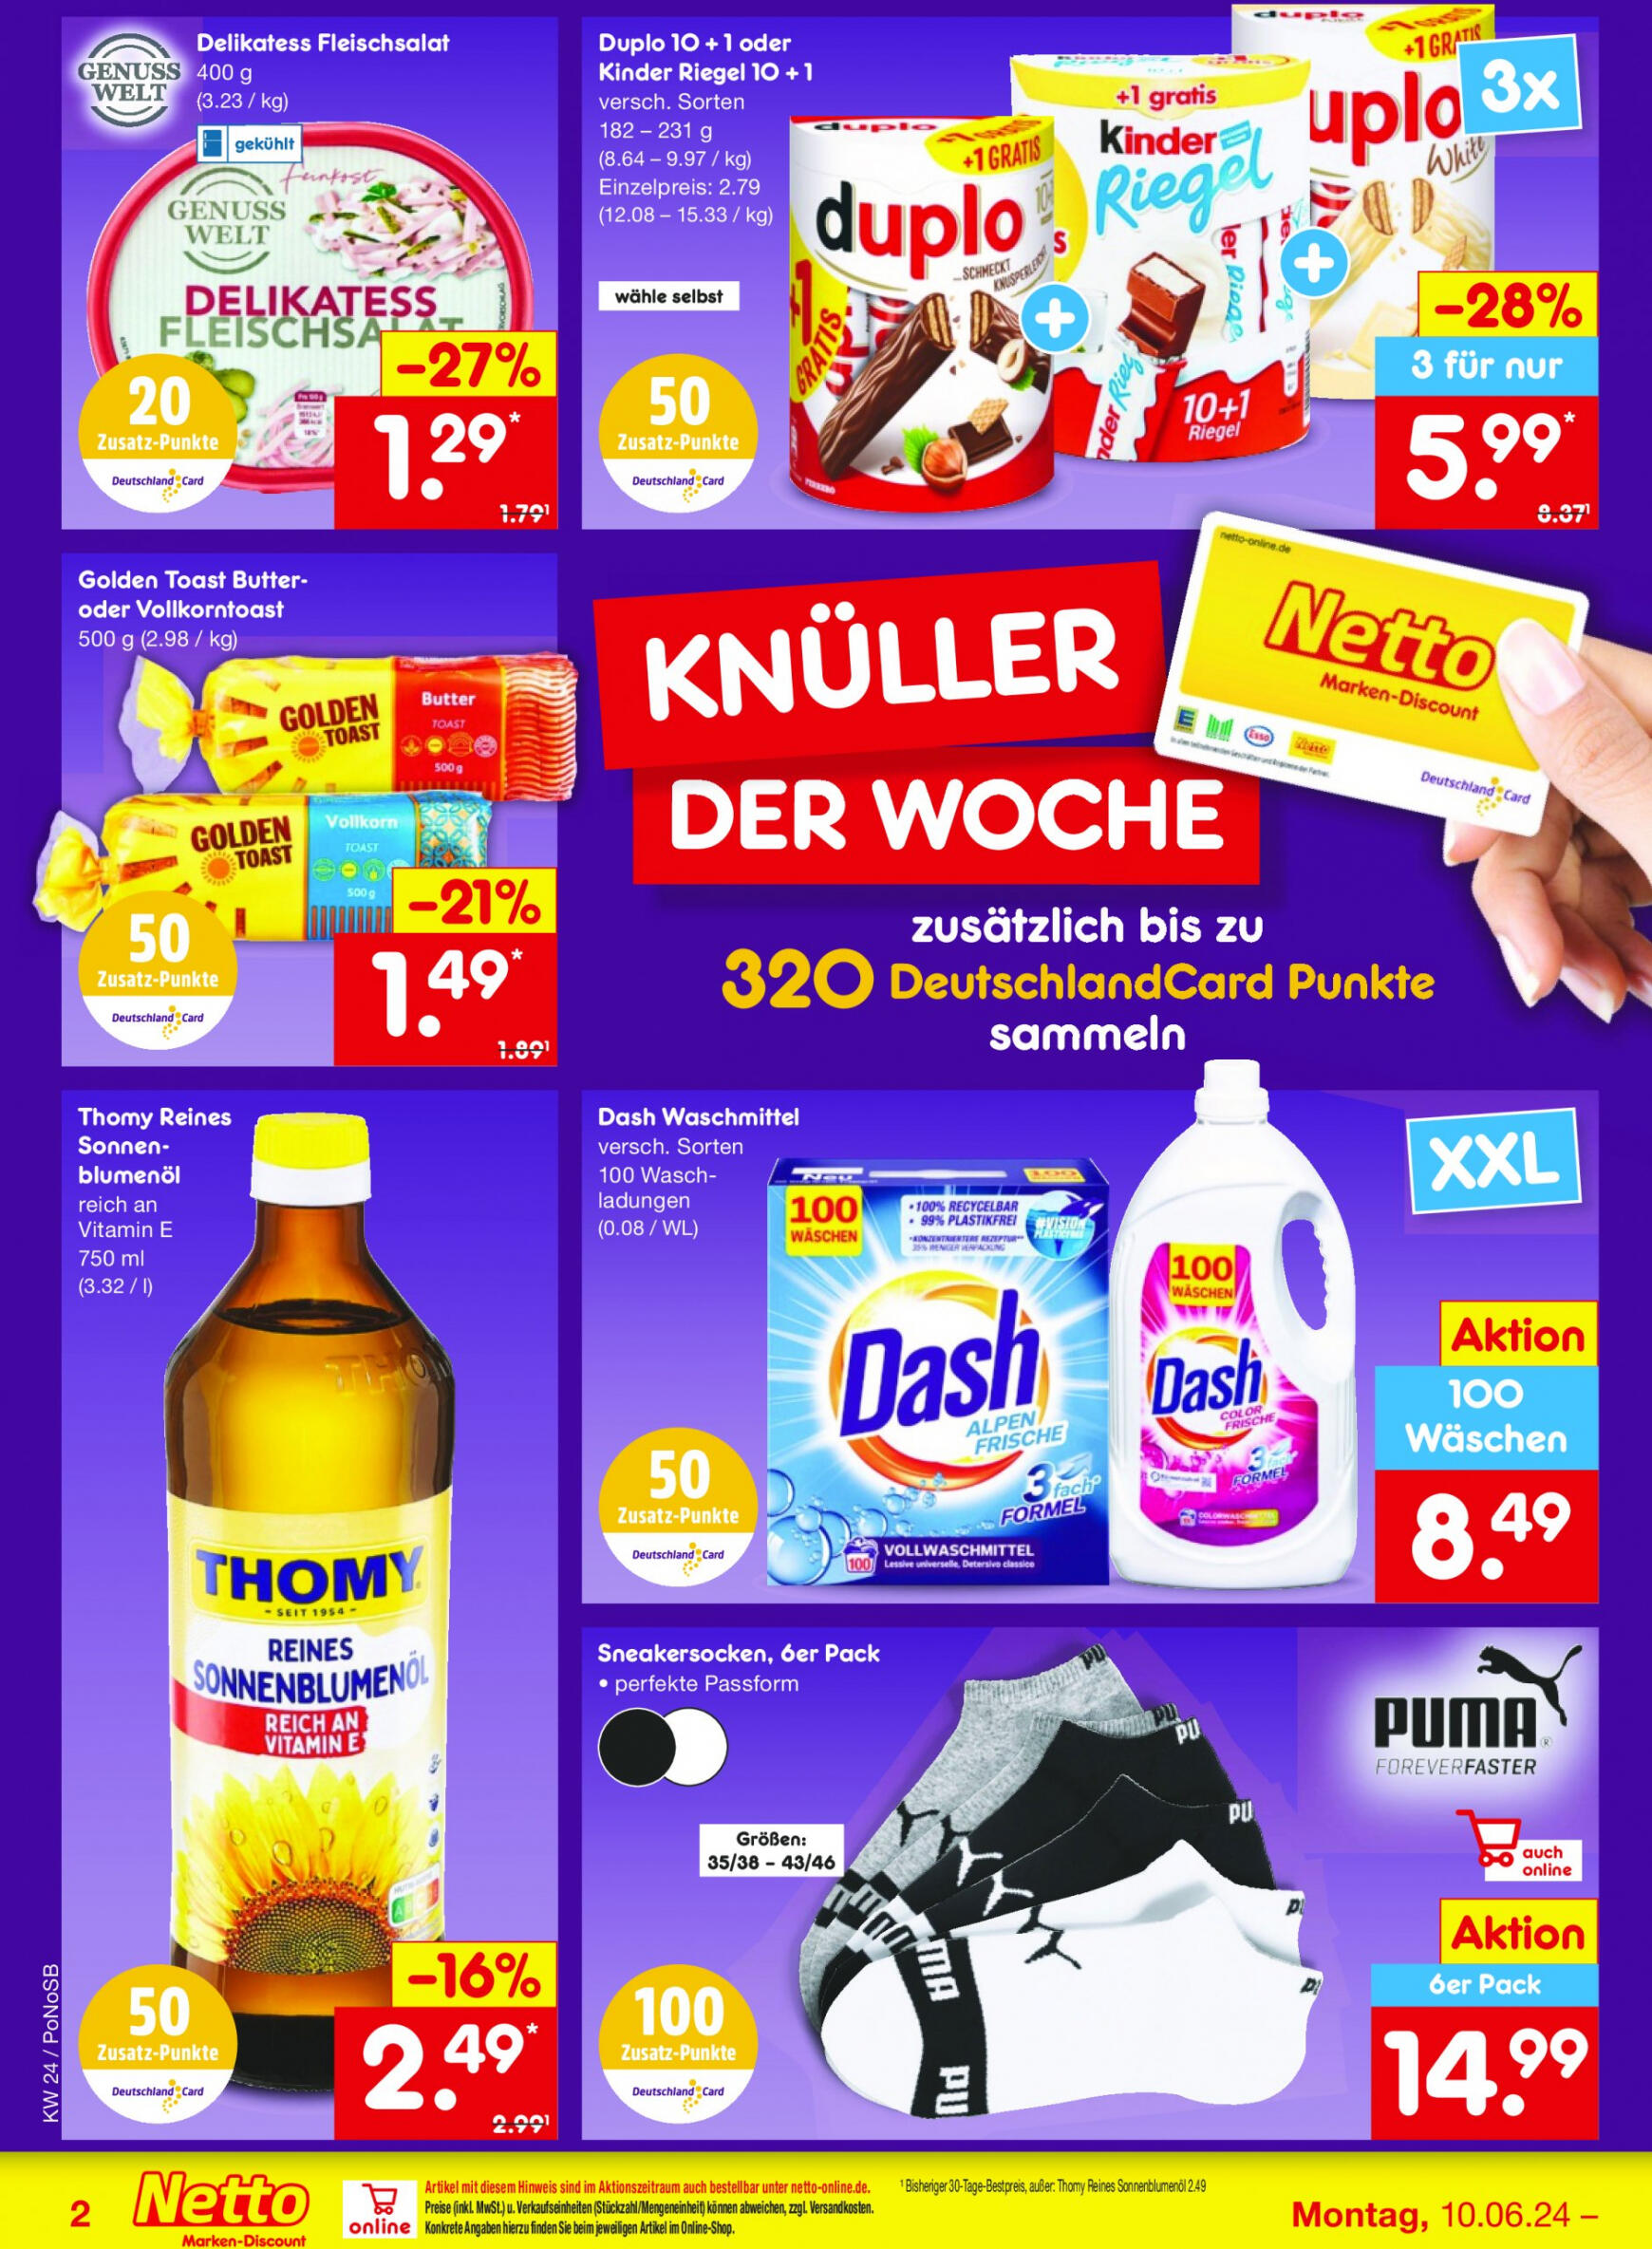 netto - Flyer Netto aktuell 10.06. - 15.06. - page: 4